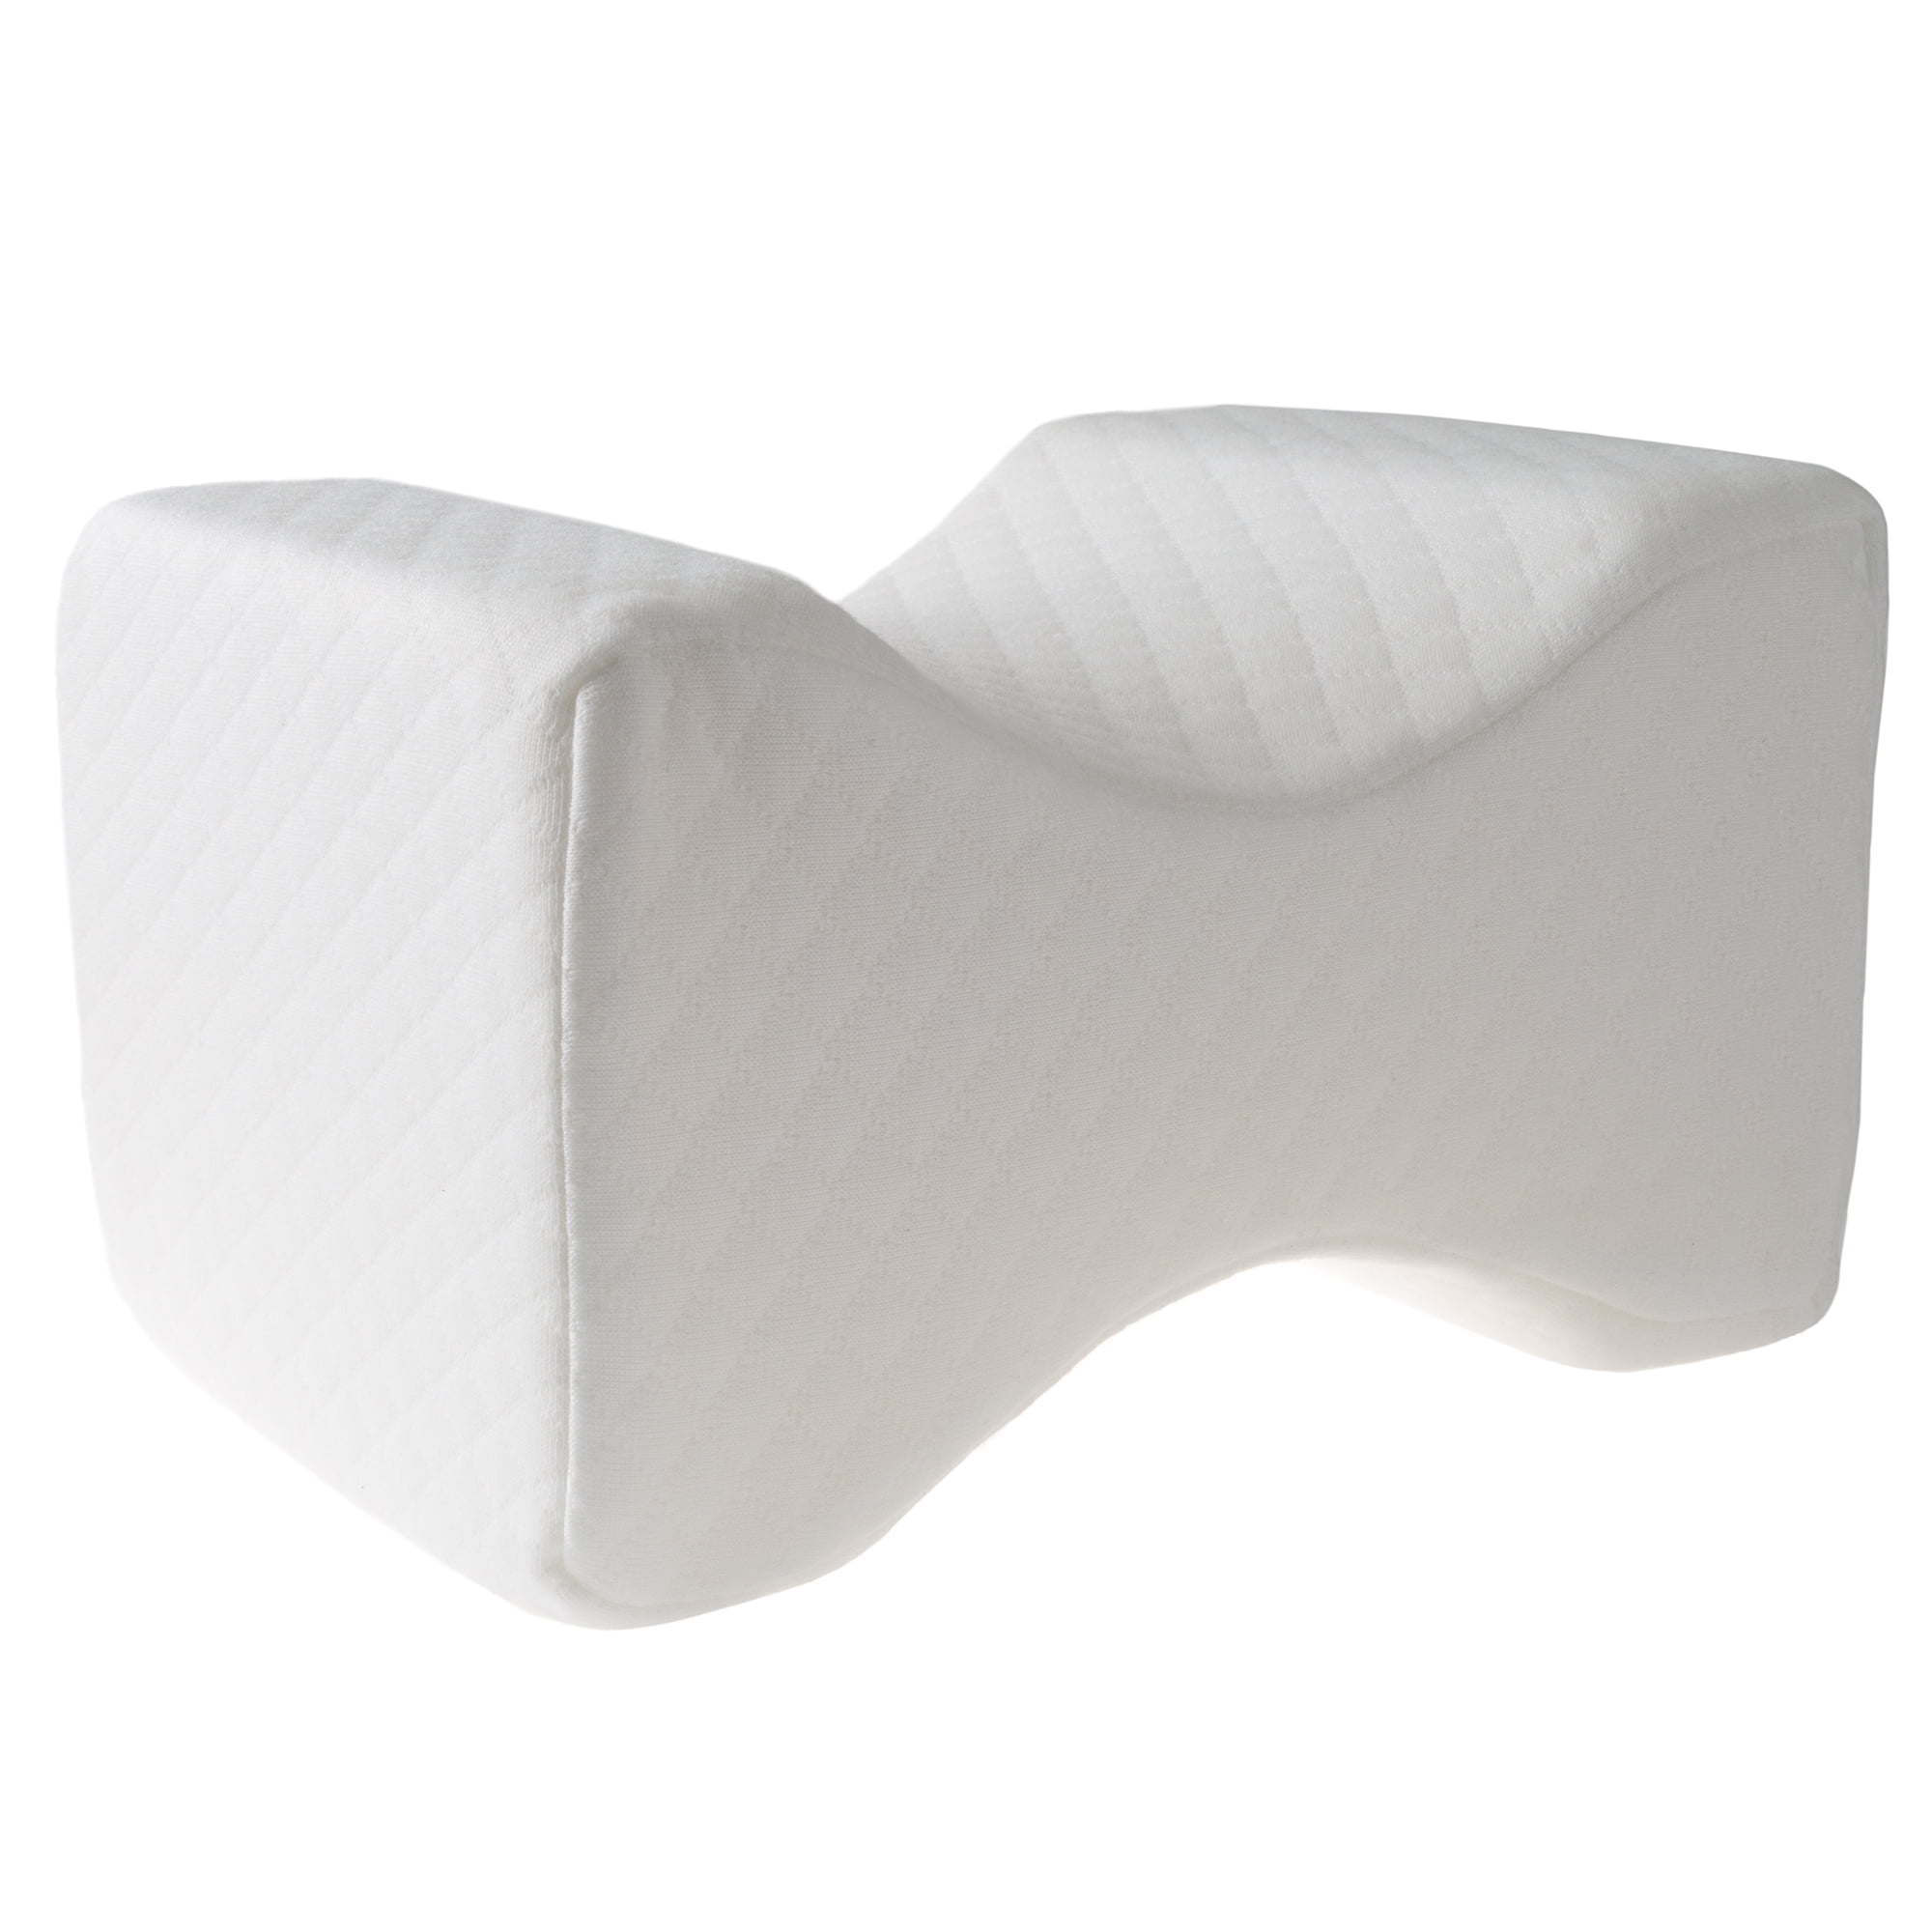 Knee Pillow for Side Sleepers - 100% Memory Foam Wedge Contour - Leg  Pillows for Sleeping - Spacer Cushion for Spine Alignment, Back Pain,  Pregnancy